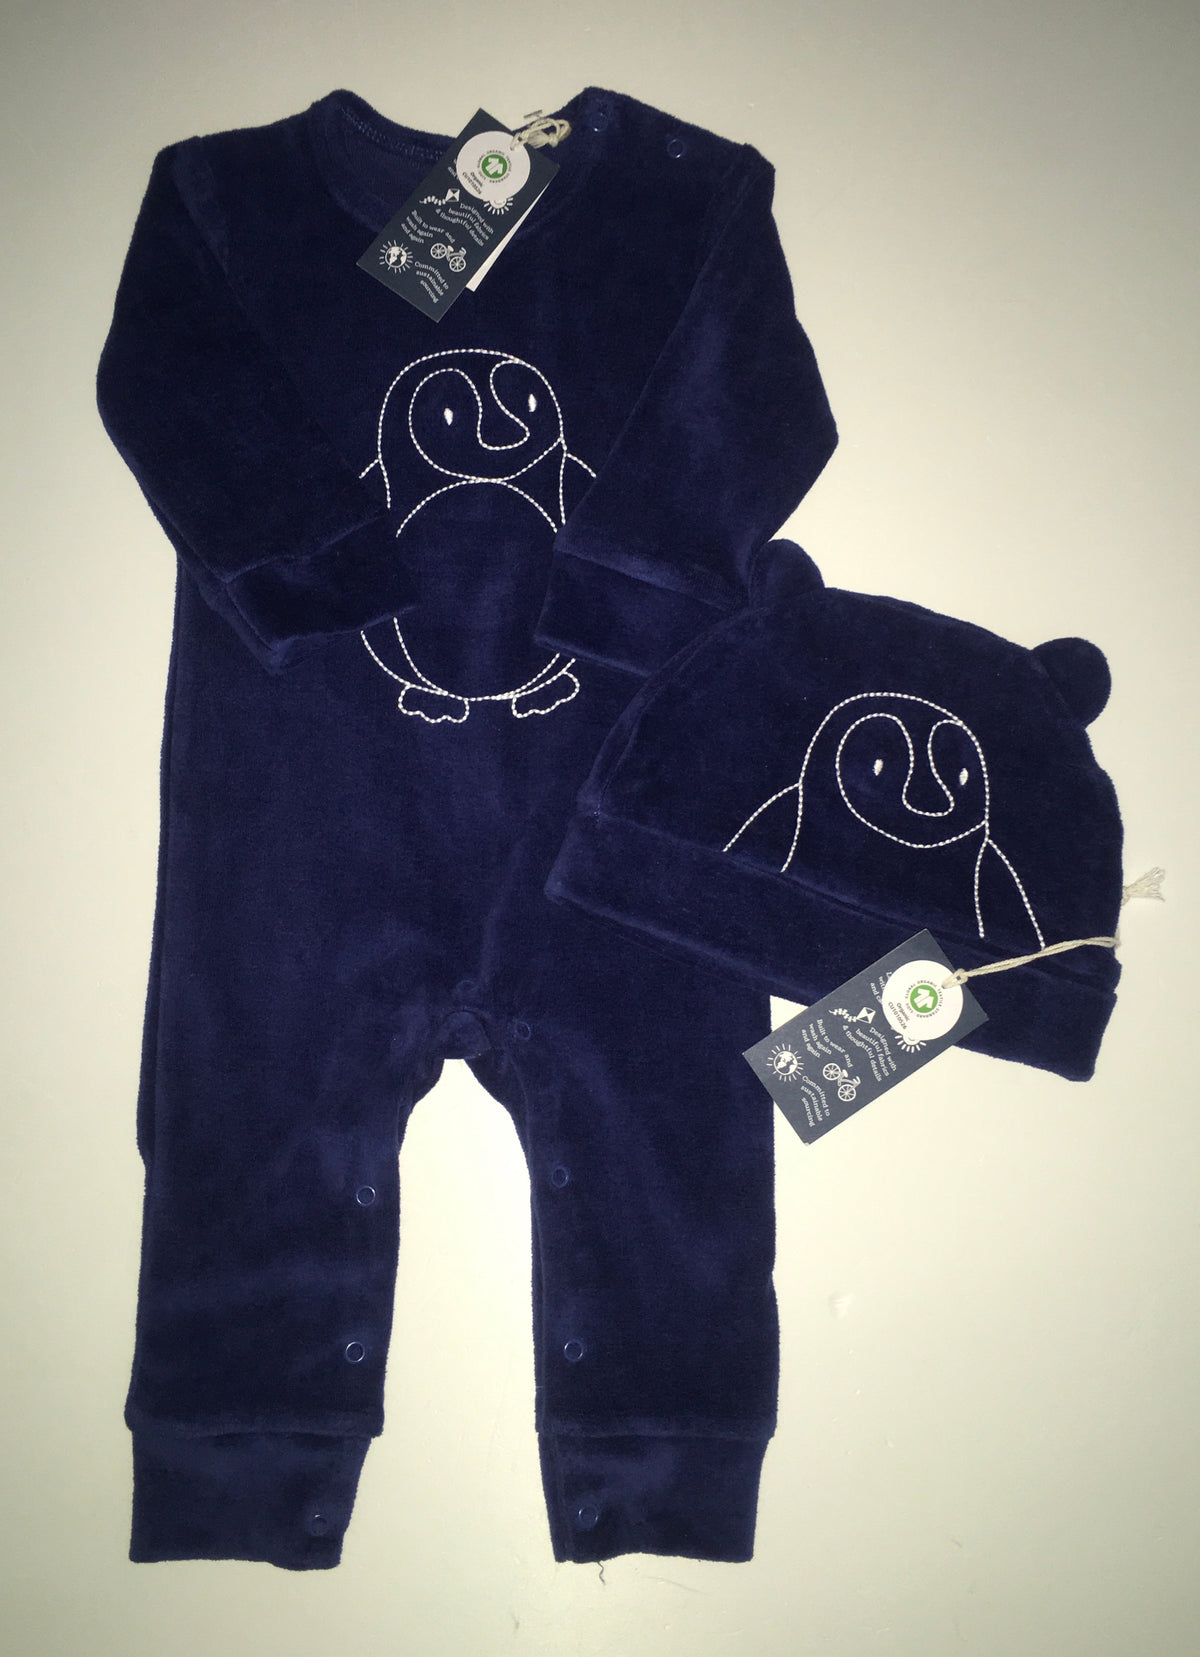 Kite Velour Sleepsuit and Hat, BNWT, Boys 6-9 Months